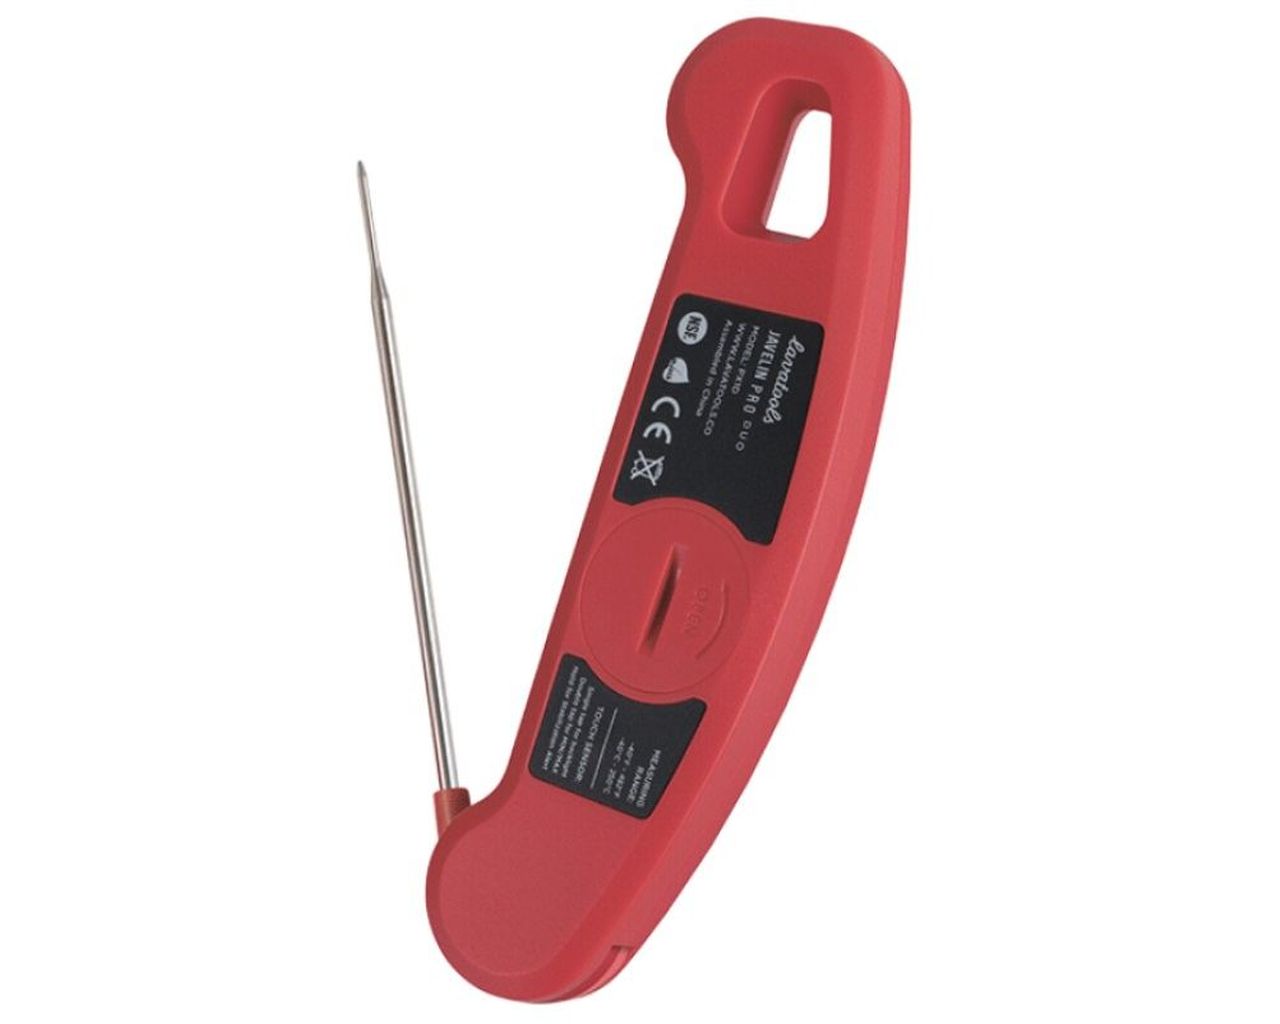 Buy Javelin Pro Instant Read Meat Thermometer - Red at Barbeques